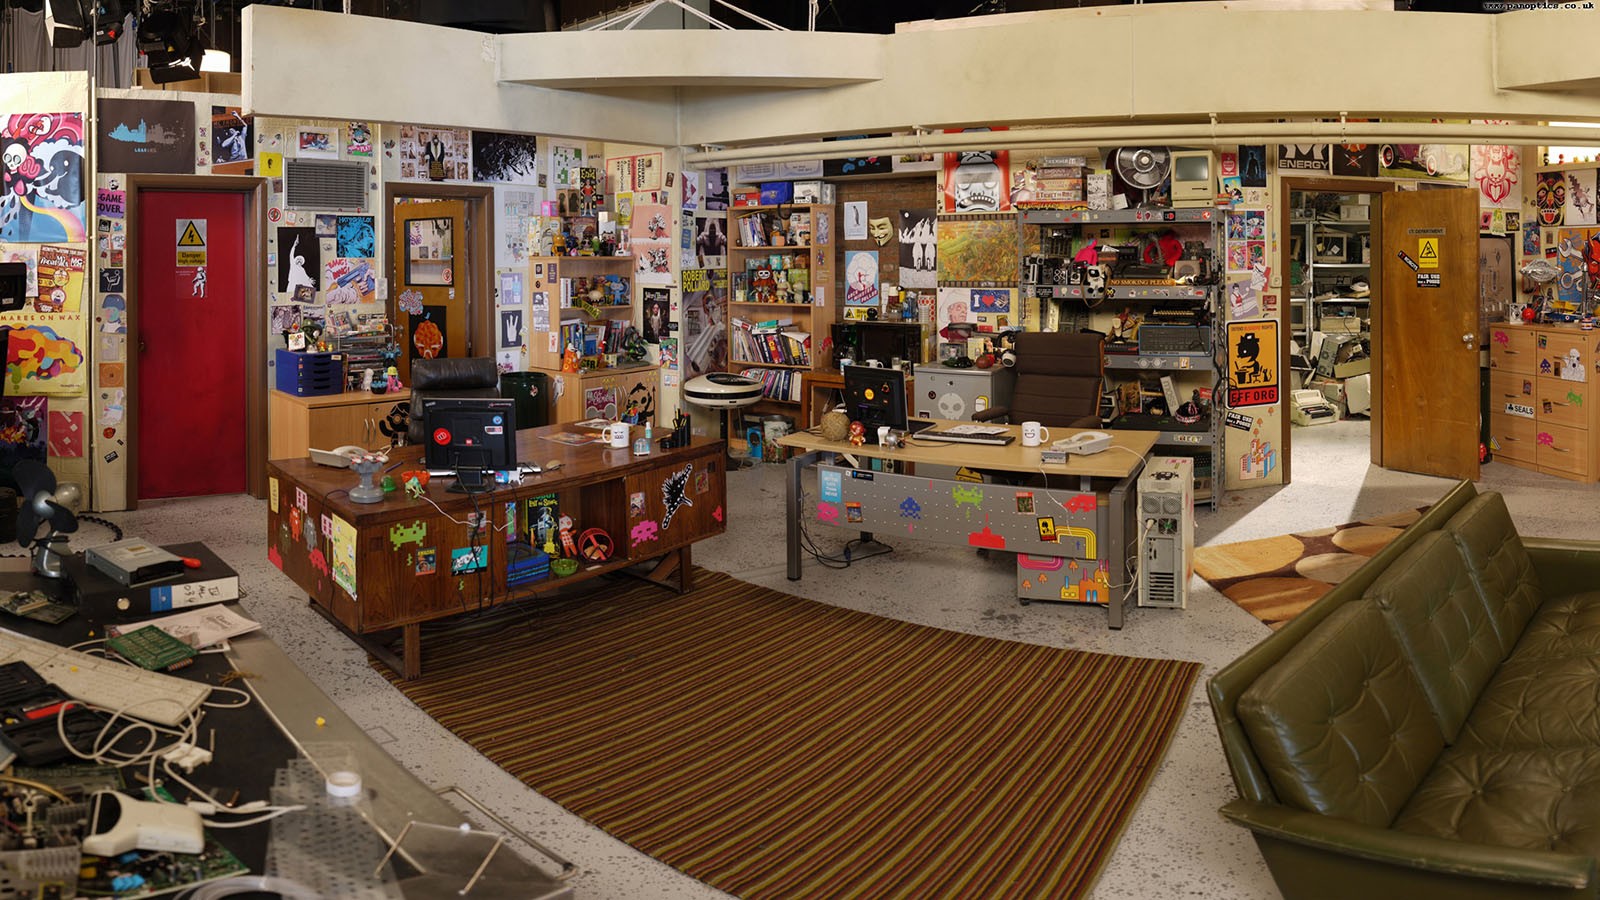 General 1600x900 The IT Crowd room interior TV series